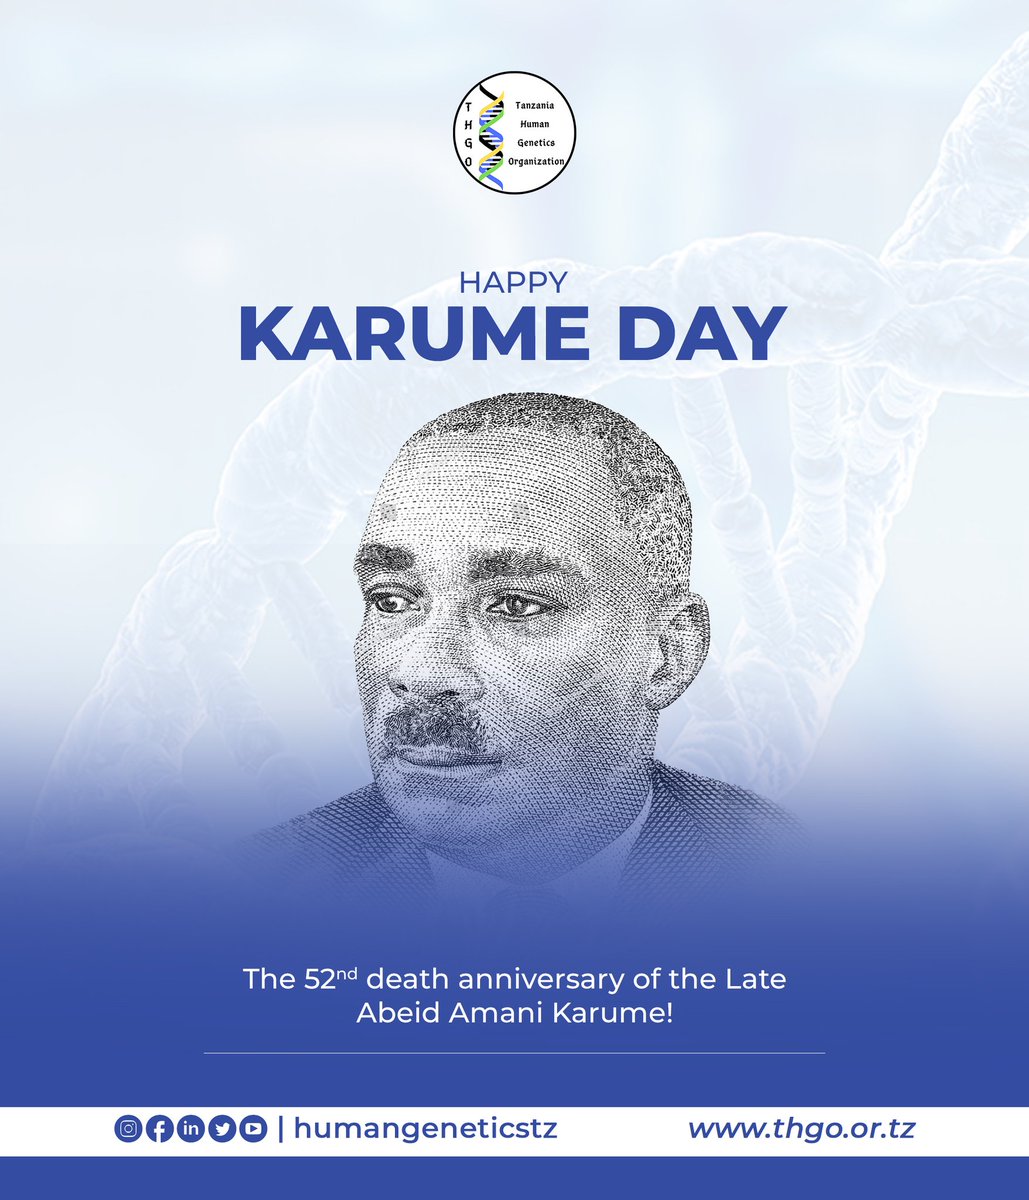 HAPPY KARUME DAY!

Honoring the Legacy: Commemorating the Visionary Leadership of the late Abeid A. Karume on KARUME DAY.

#KarumeDay
#humangenetics